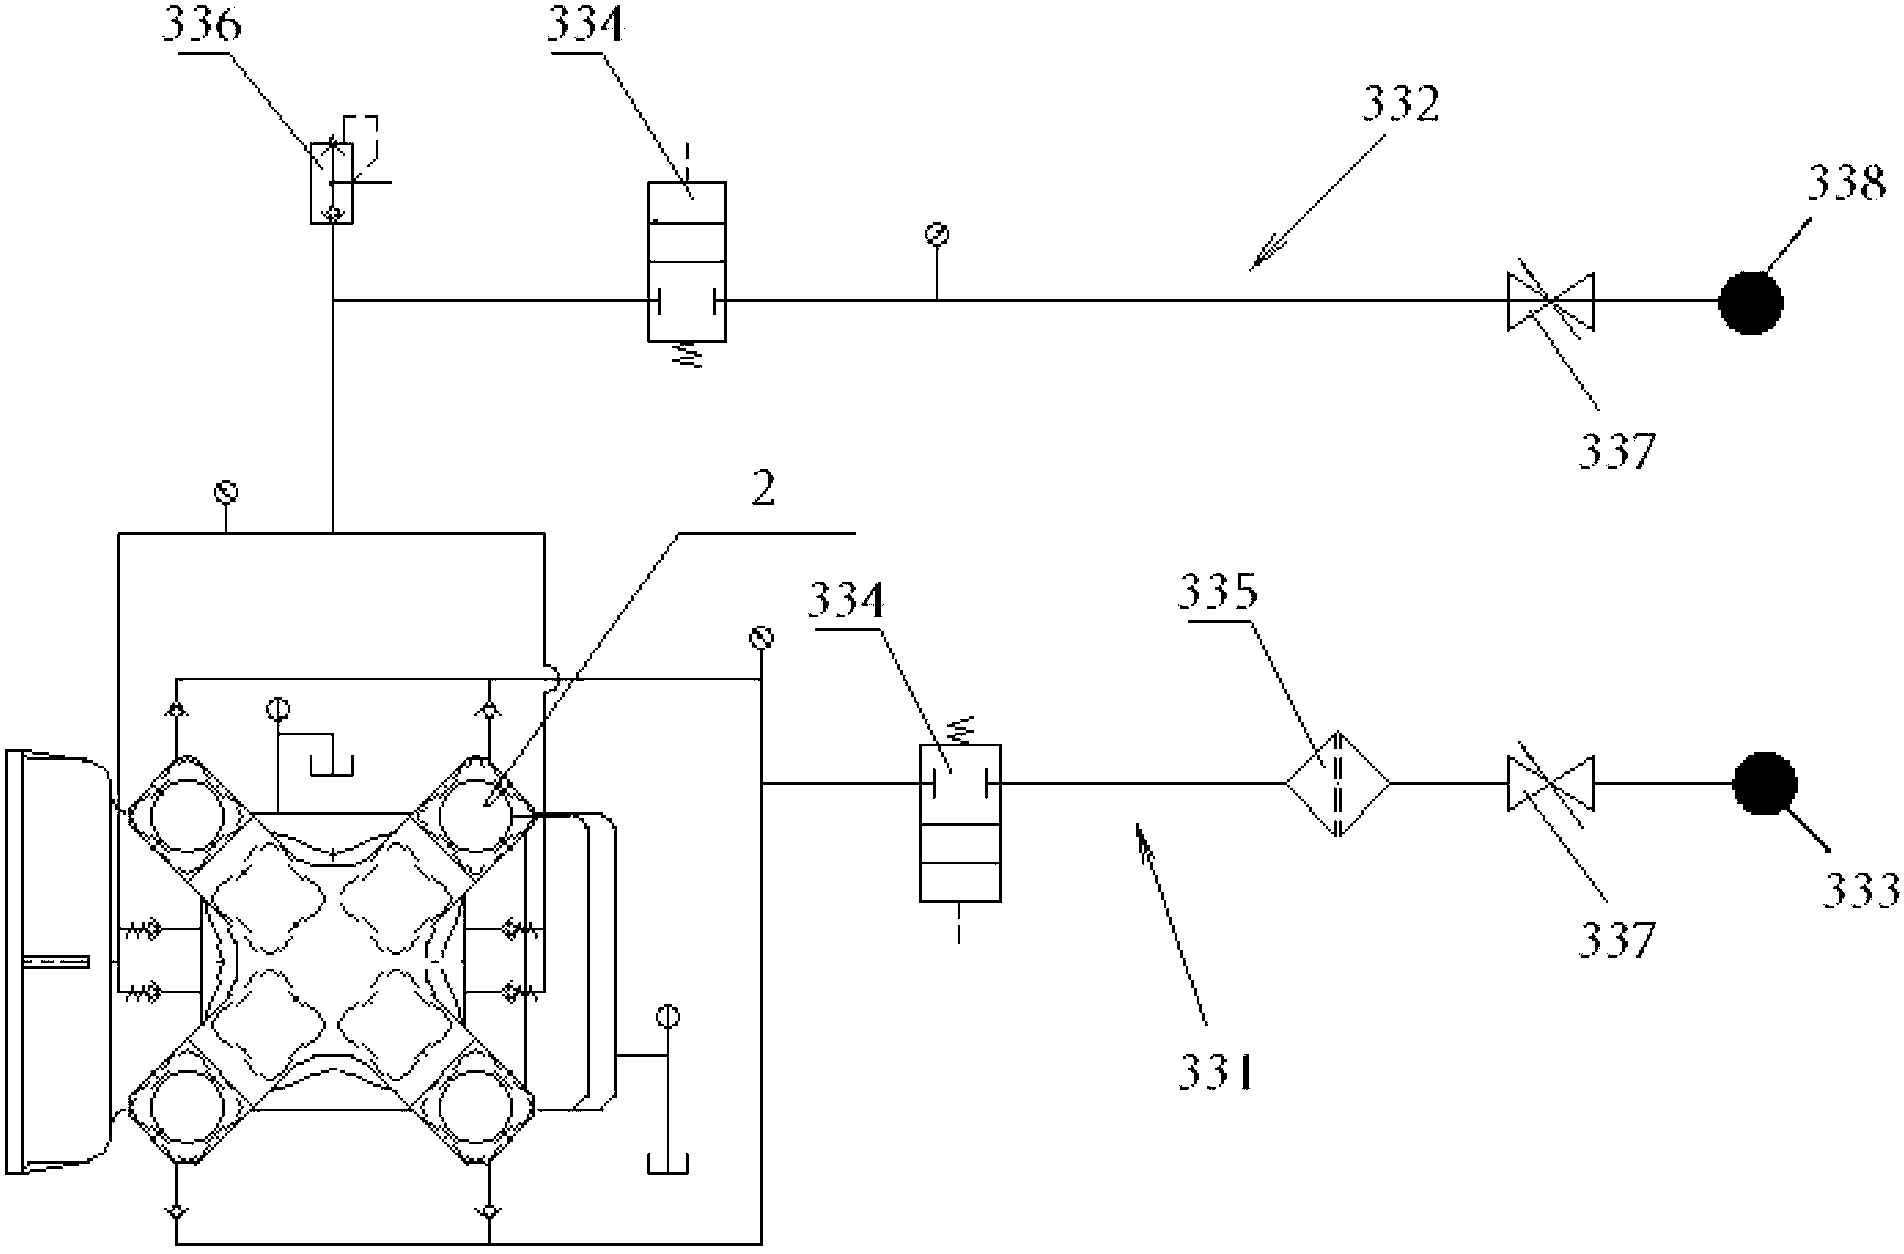 Integrated high-pressure gas supply system with solar Stirling generator unit